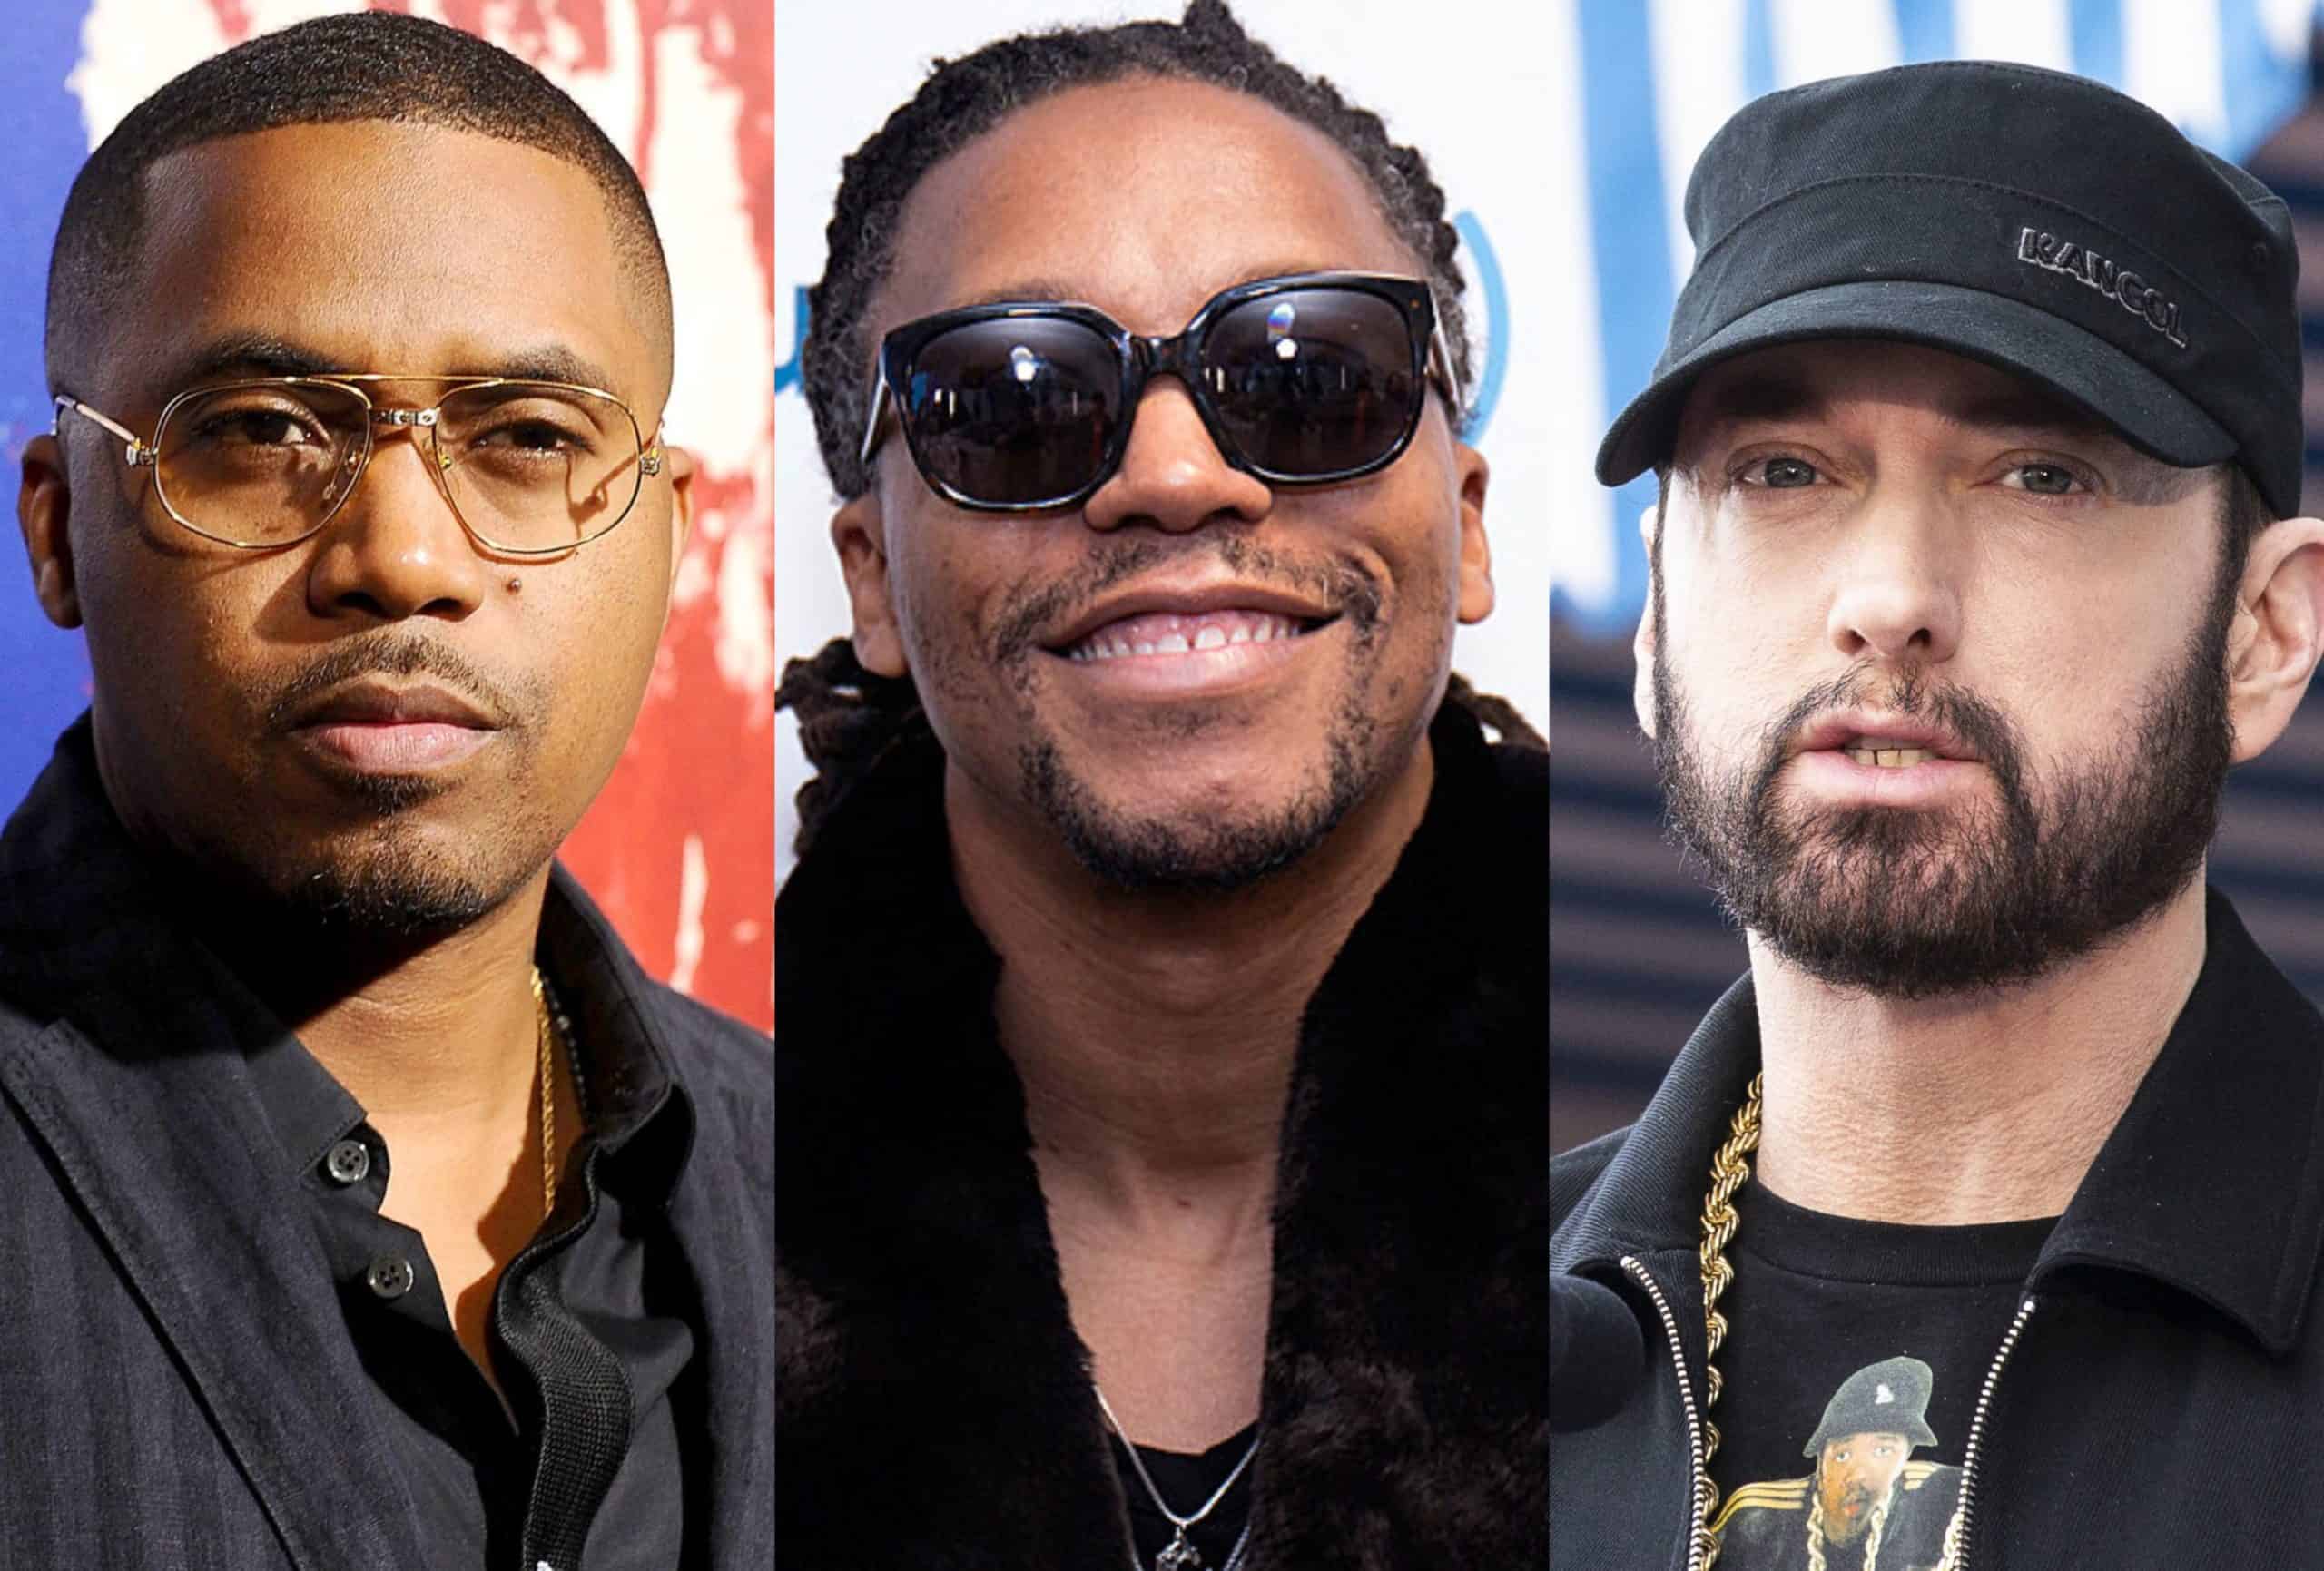 Lupe Fiasco Reacts To New Nas, Eminem & EPMD's Collab EPMD 2